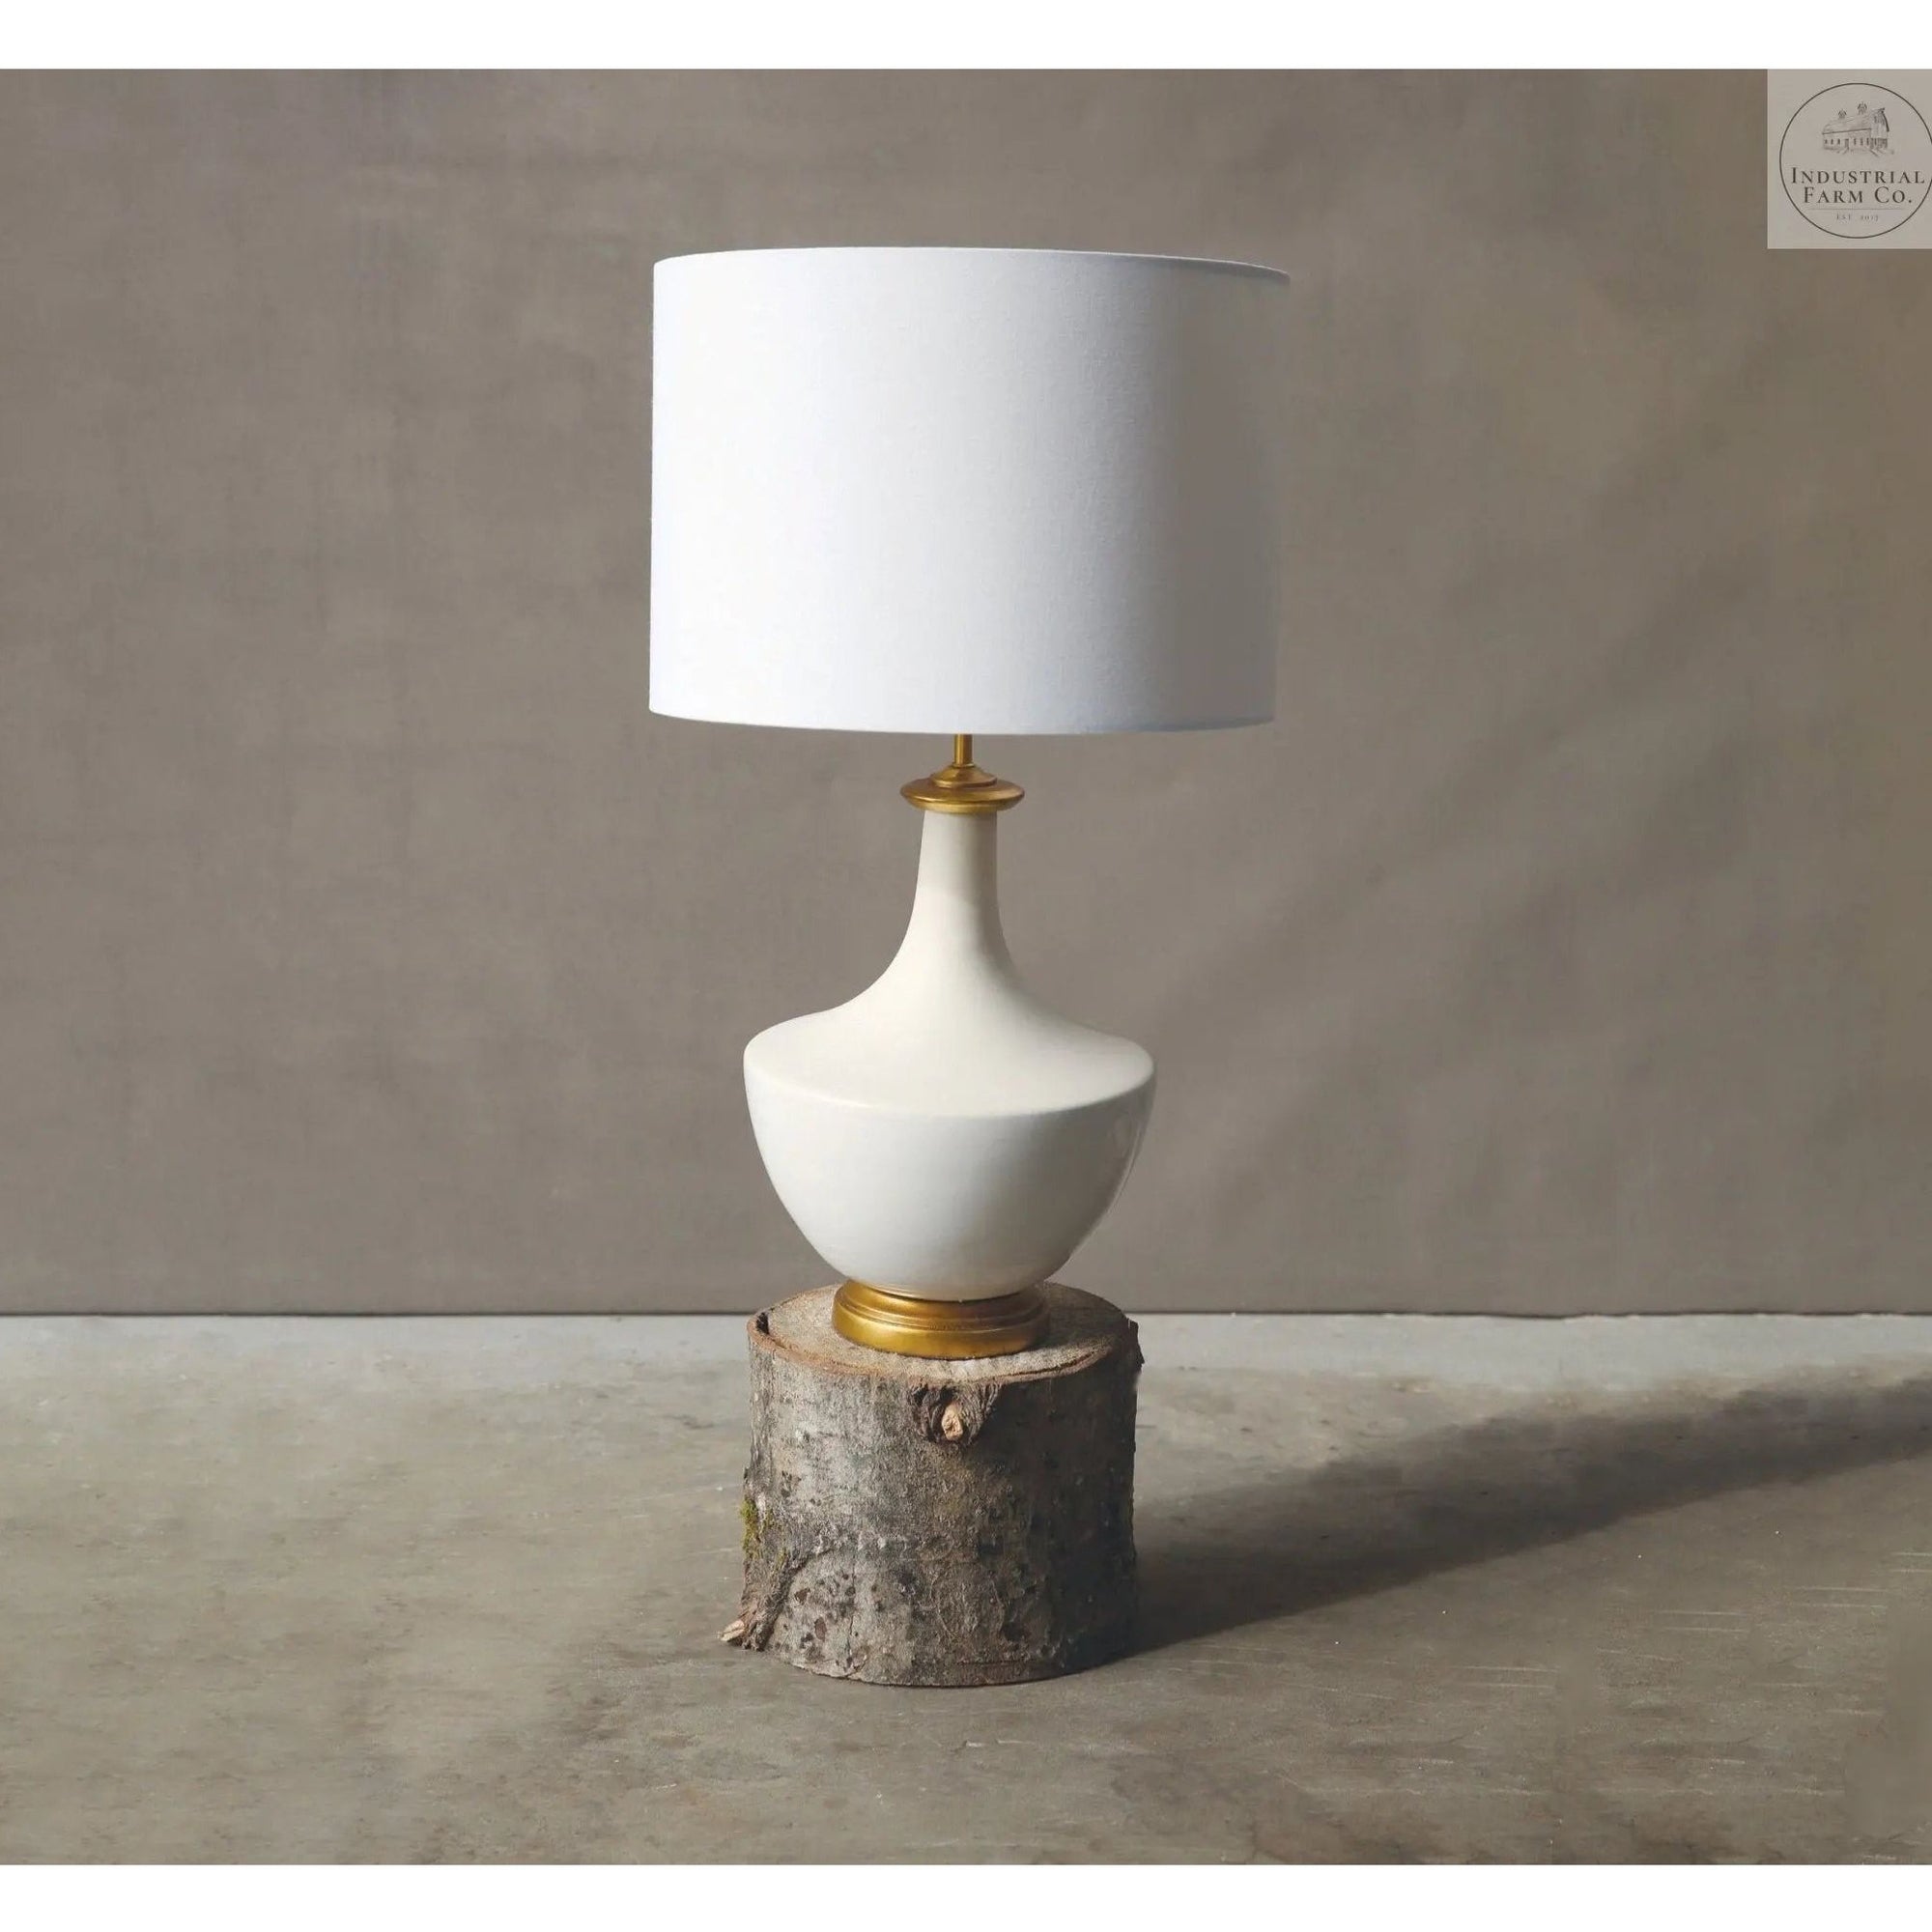 Roswitha Table Lamp | Industrial Farm Co